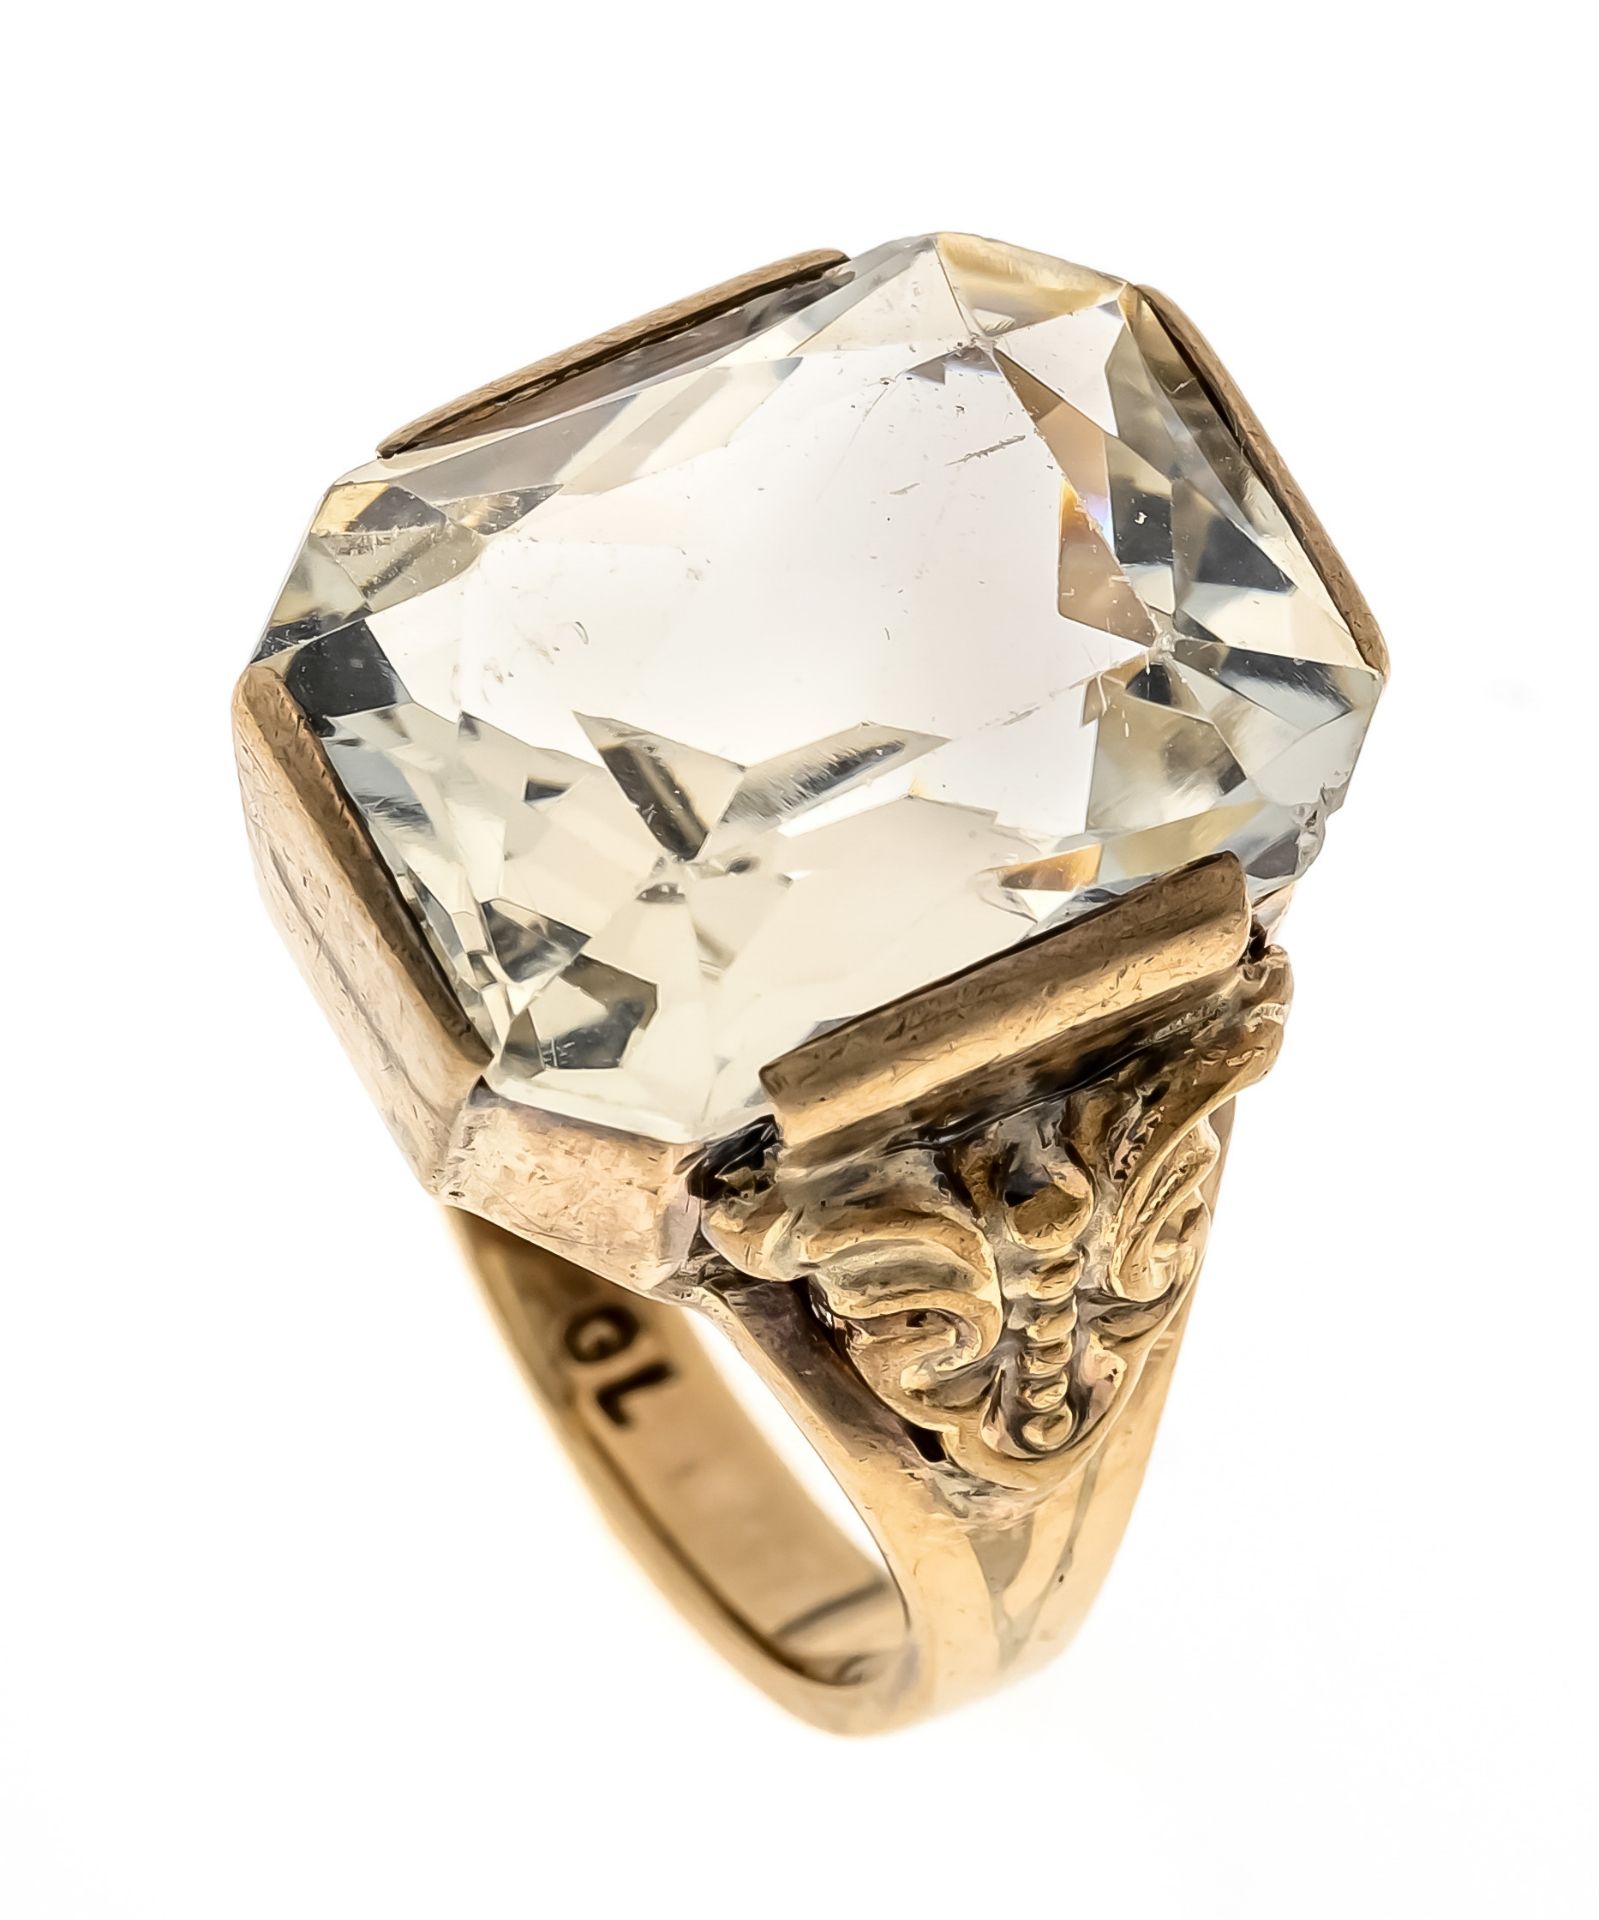 Rock crystal ring GG 333/000 with one antique cut faceted rock crystal 16 x 13 mm (round edge